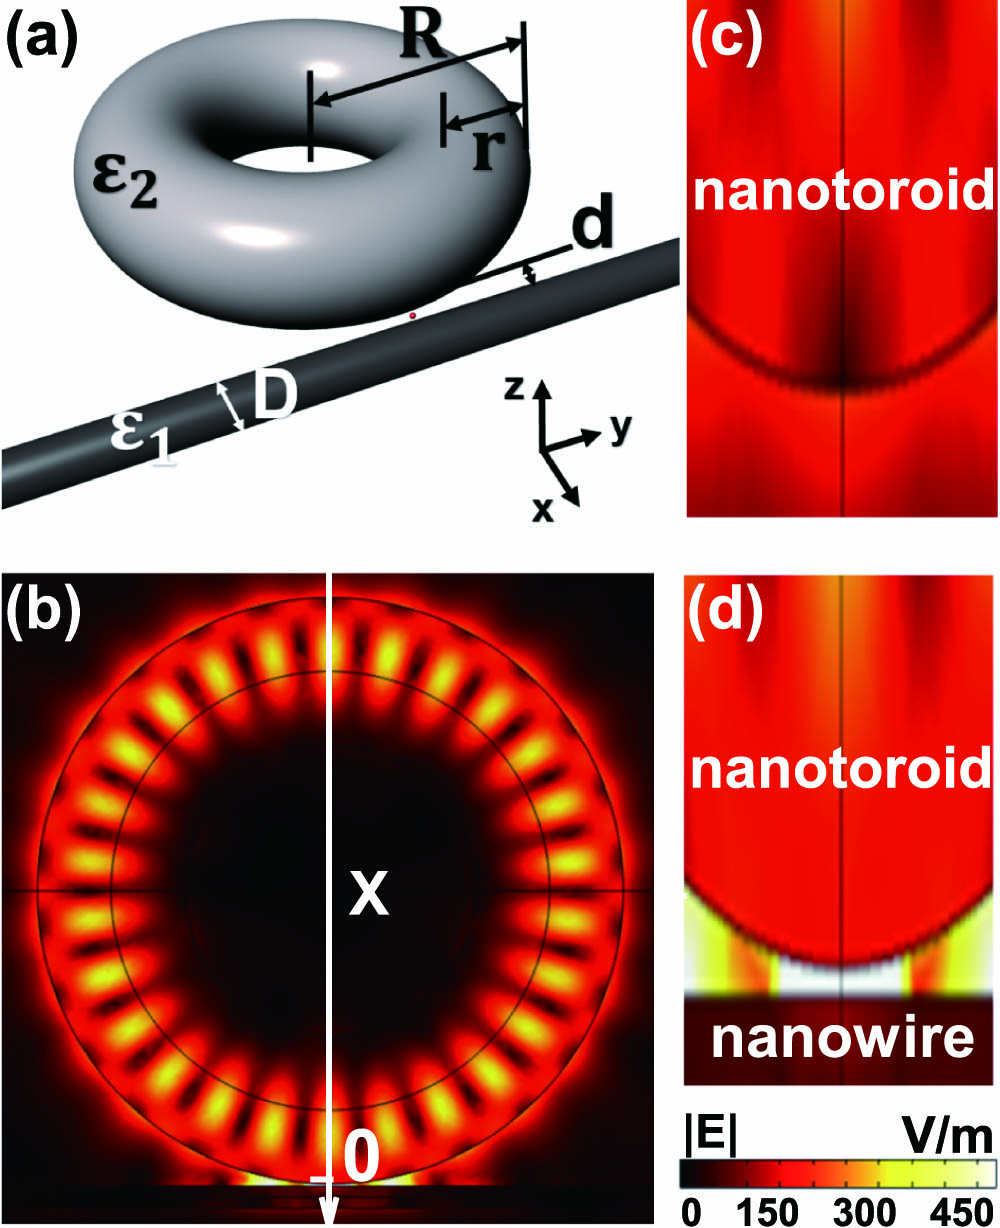 Nanotoroid–nanowire system. (a) Schematic diagram of a dielectric nanotoroid close to a dielectric nanowire. (b) Electric field distribution of the nanostructure. Details of electric field distributions of the same size nanotoroid (c) without and (d) with nanowire with parameters R=500 nm, r=170 nm, d=5 nm, ϵ1=12, ϵ2=5, D=100 nm, and working wavelength λ=524.693 nm.